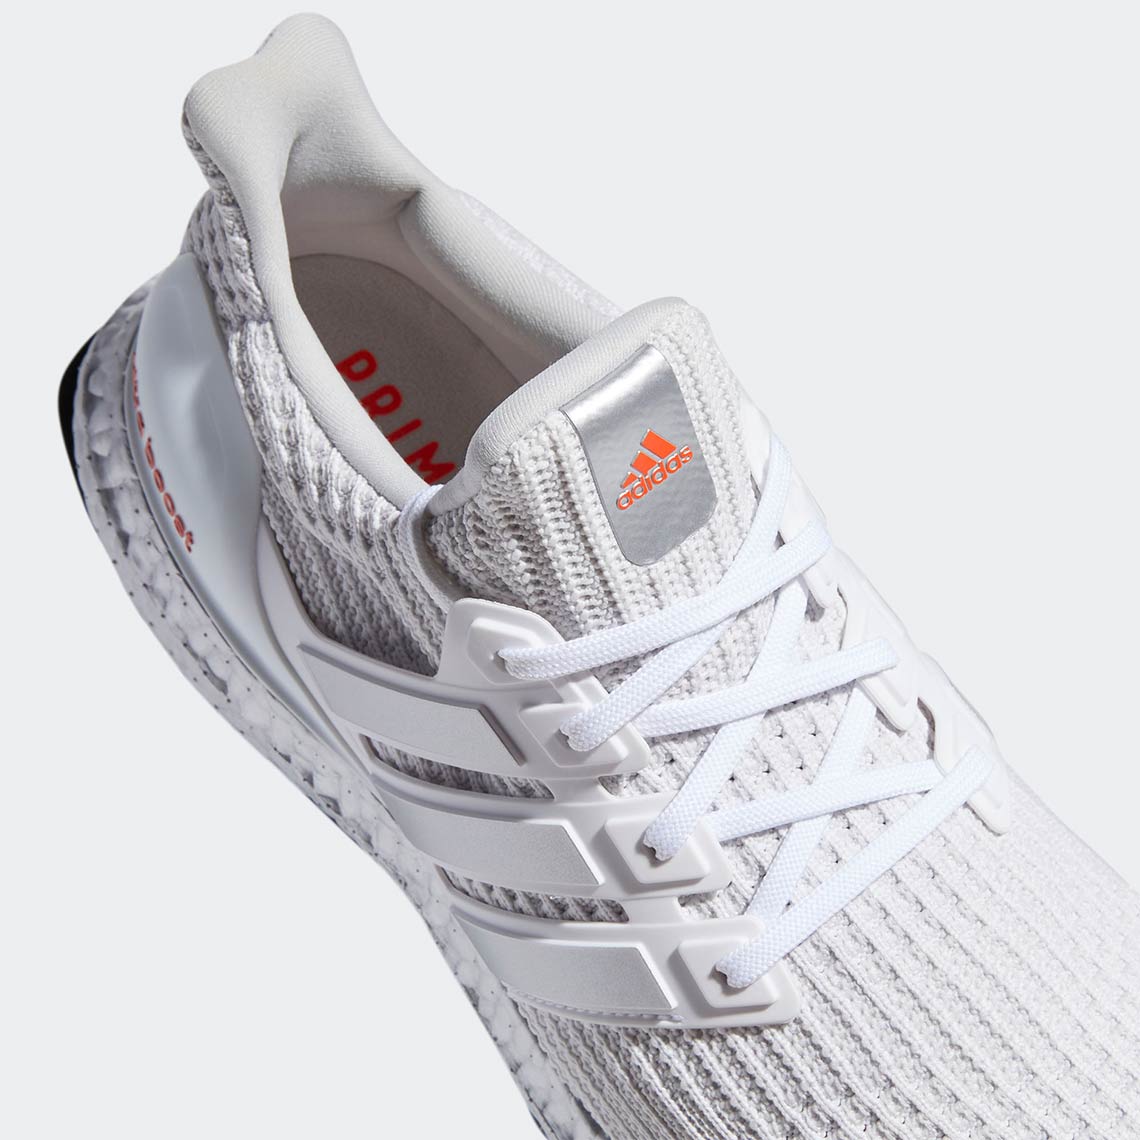 Adidas Ultra Boost 4.0 Dna White G55461 7